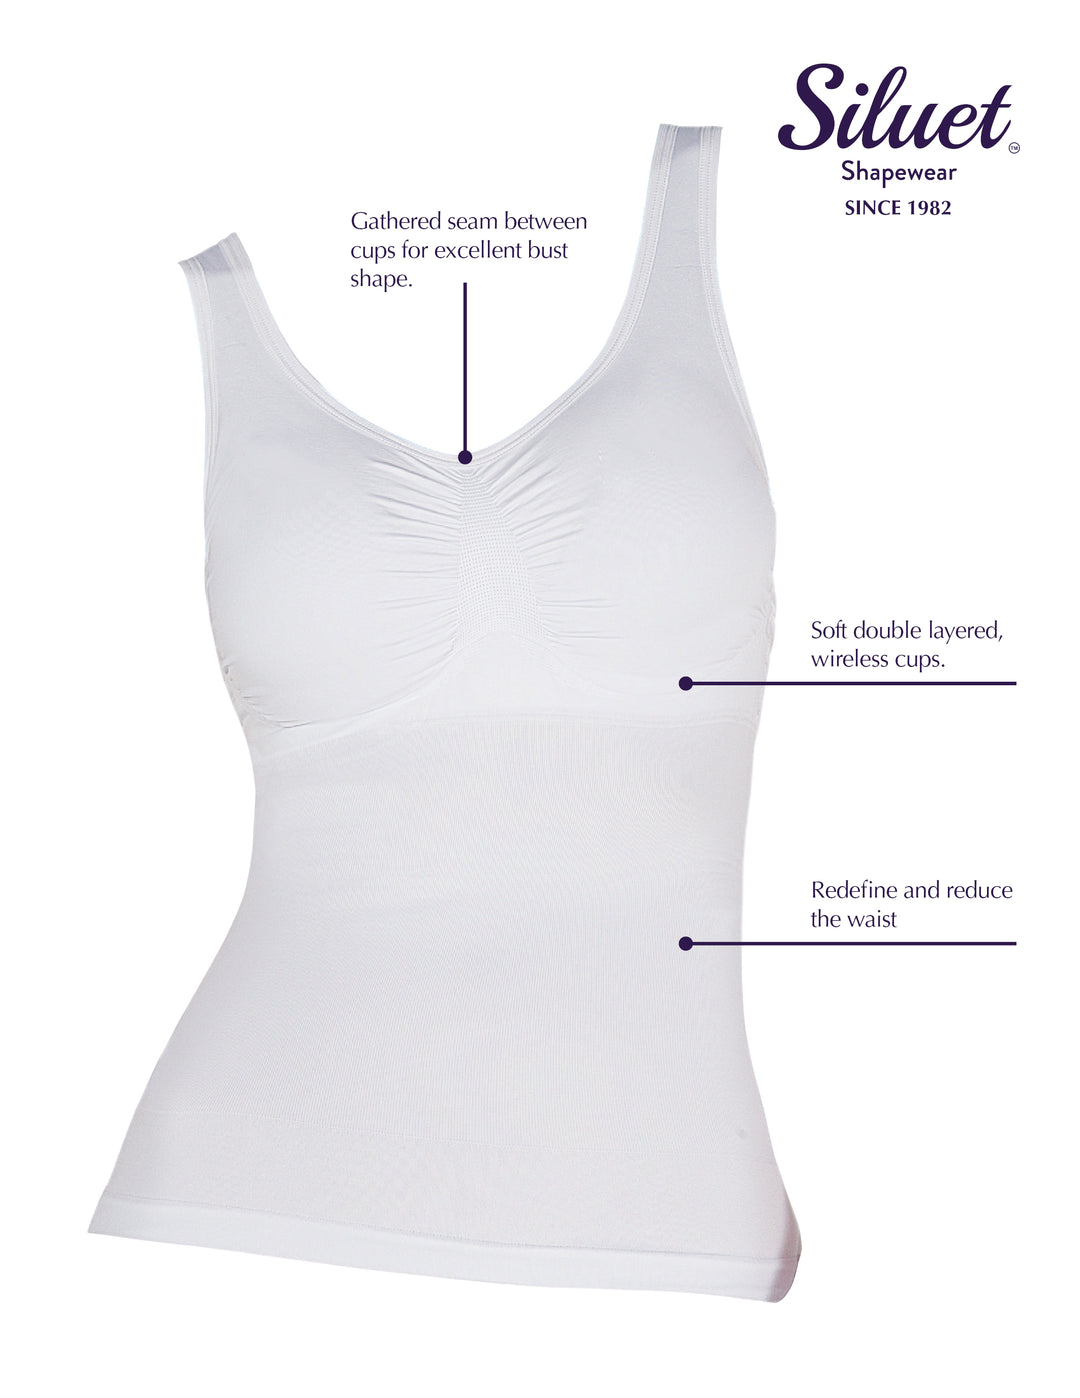 1S8060 Camibra Invisible Seamless Shaper Camisole with Top Bra, Broad Back